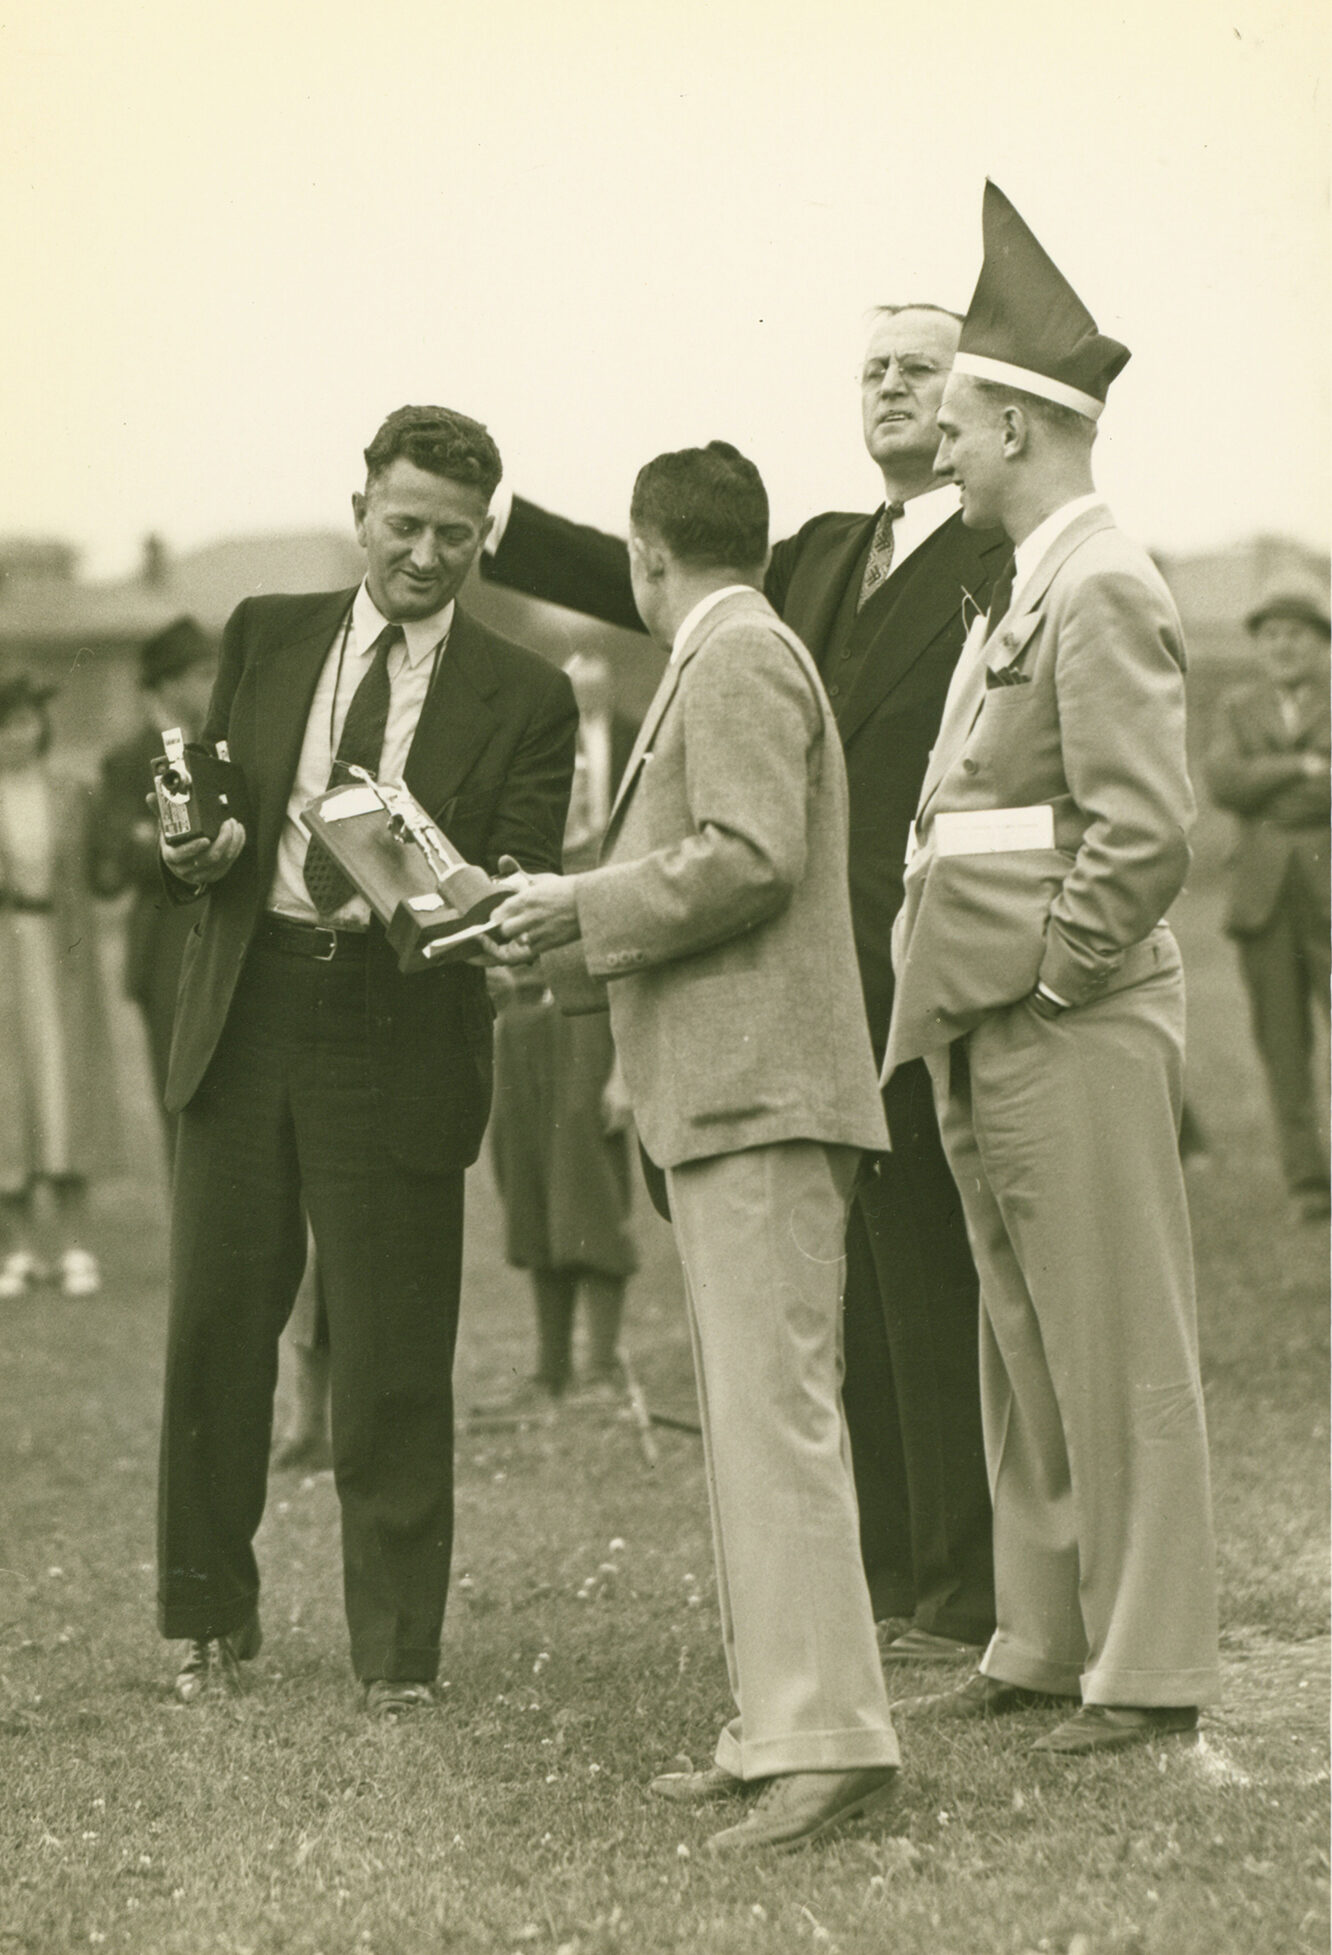 Dr. Shankweiler, holding the camera with which he filmed the 1940s footage, standing with "Haps" Benfer, Alumni Day, 1938